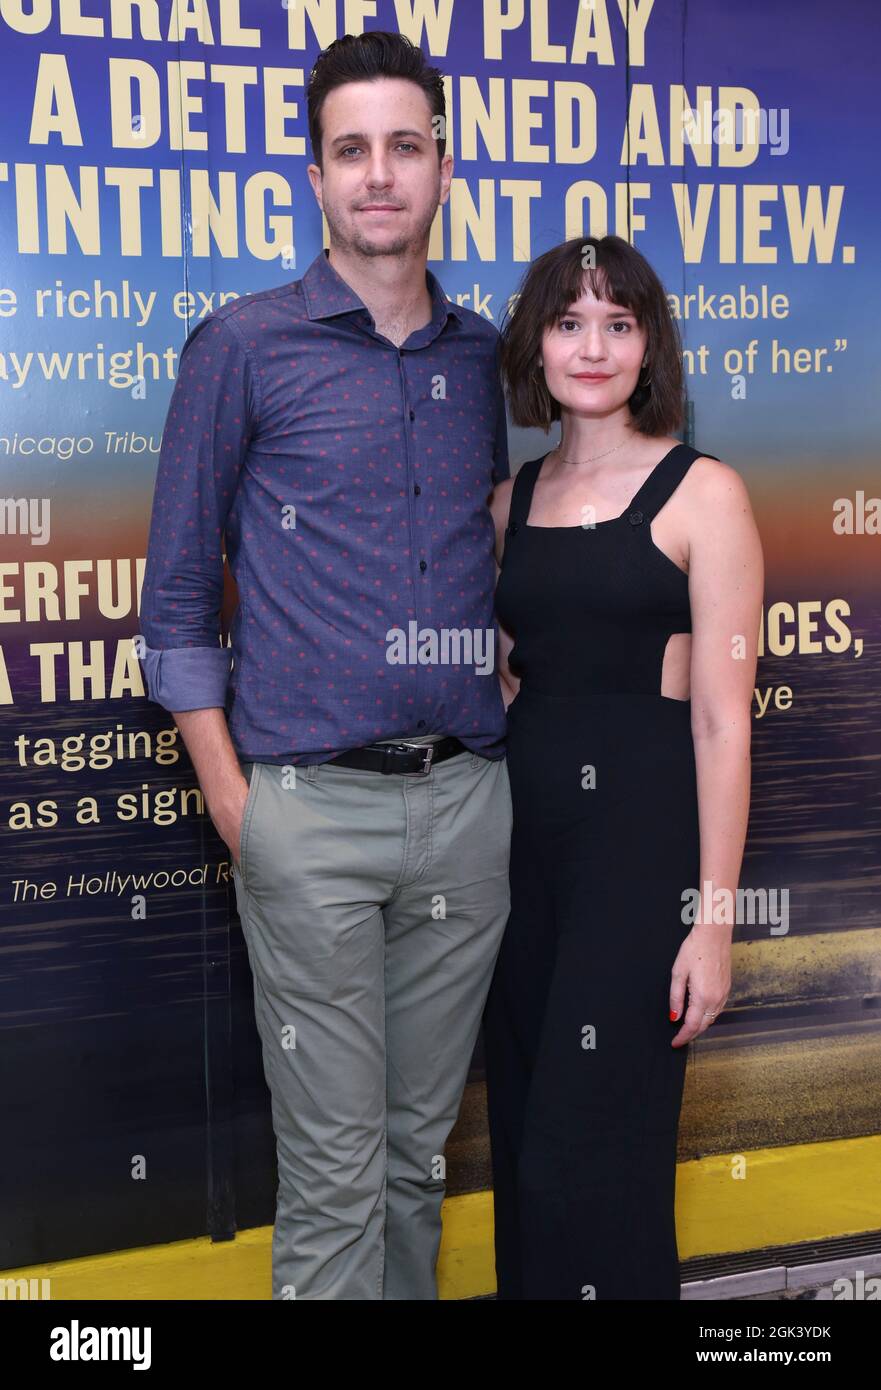 New York, NY, USA. 12th Sep, 2021. Kevin Armento and Jaki Bradley arrive at the Broadway opening for Pass Over, held at the August Wilson Theatre, on September 12, 2021, in New York City. Credit: Joseph Marzullo/Media Punch/Alamy Live News Stock Photo